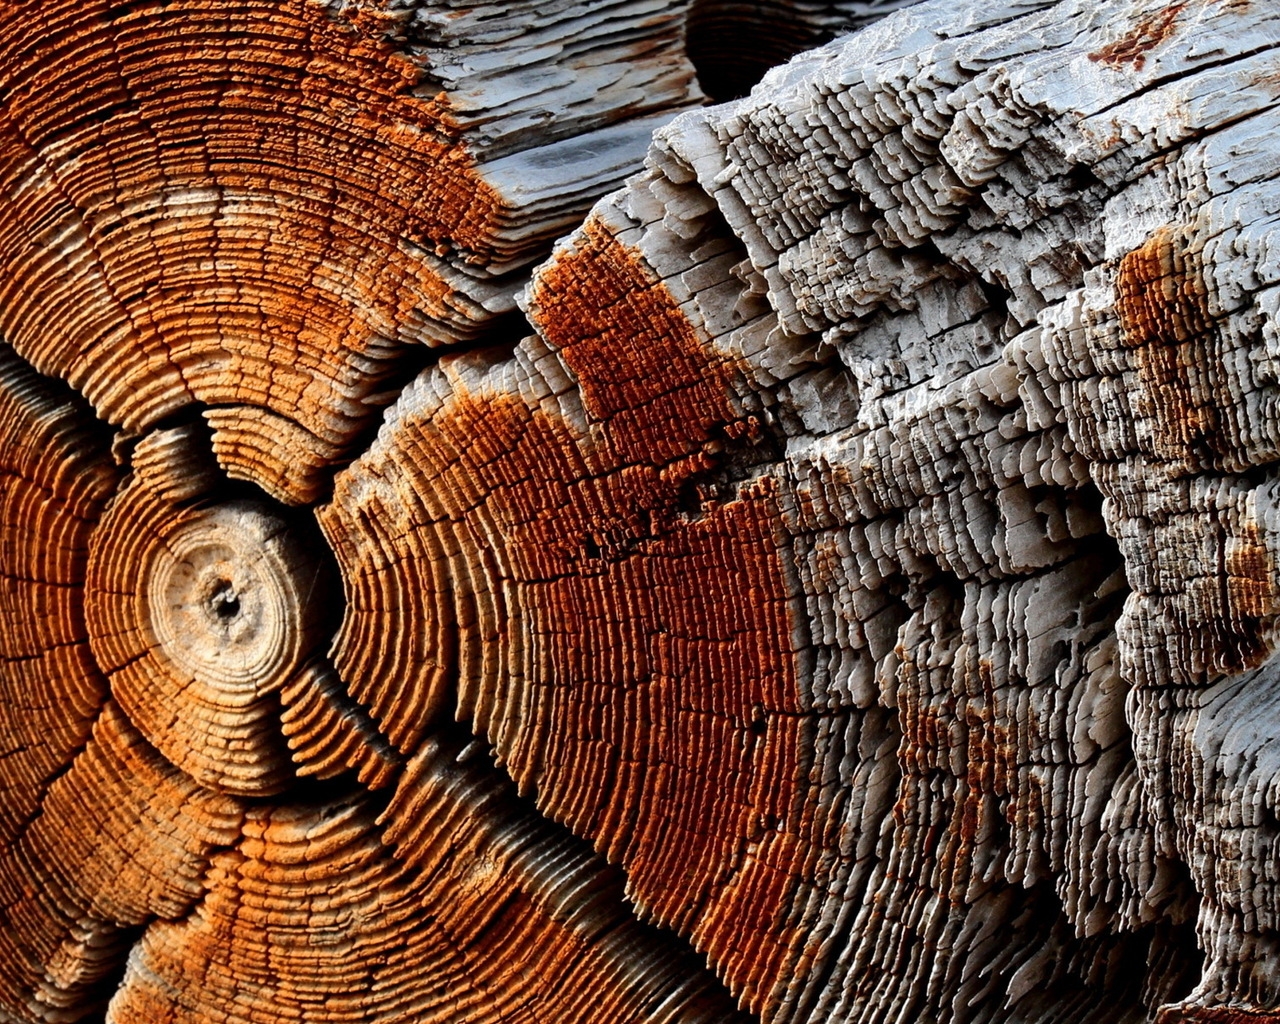 Dry Wood Texture for 1280 x 1024 resolution